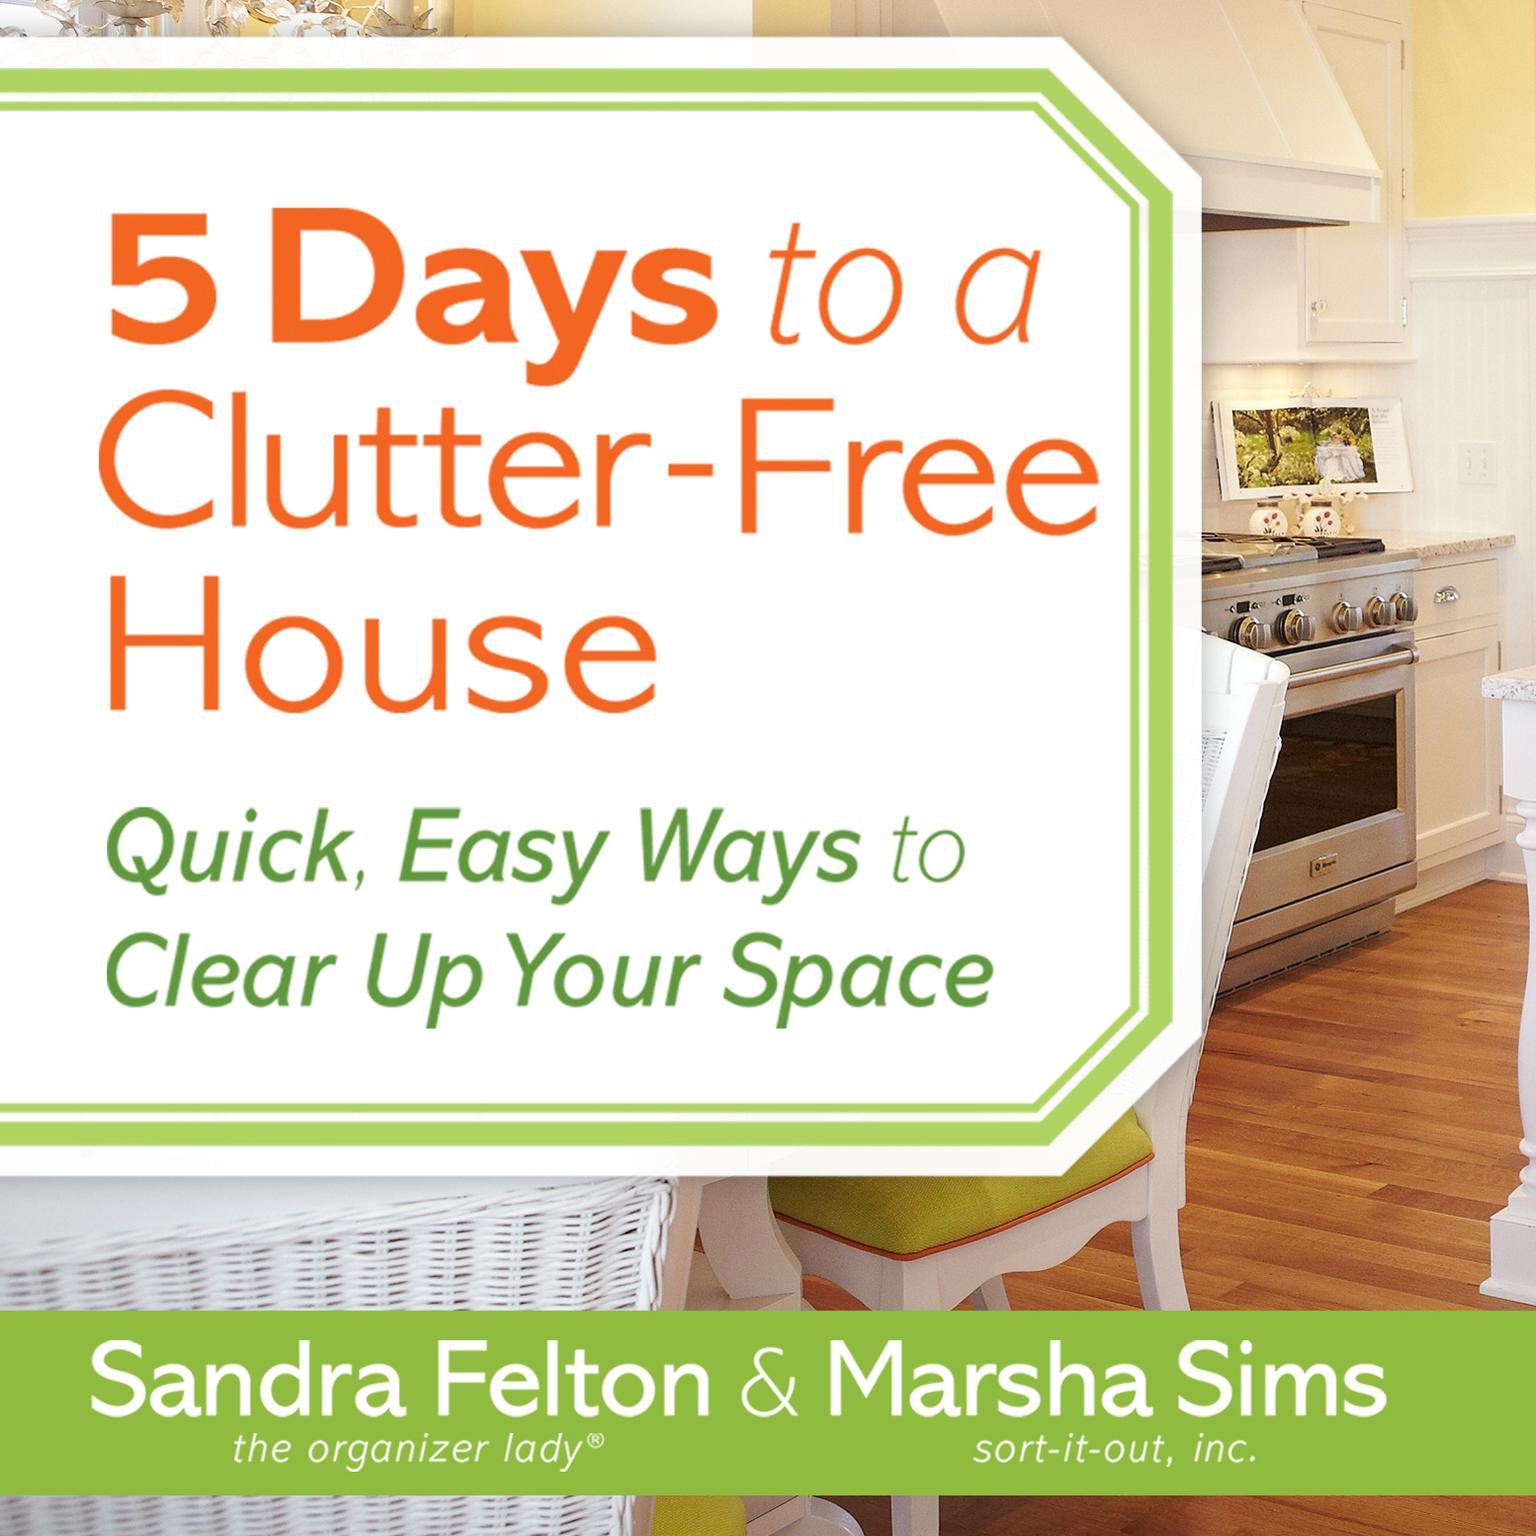 5 Days to a Clutter-Free House: Quick, Easy Ways to Clear Up Your Space Audiobook, by Sandra Felton